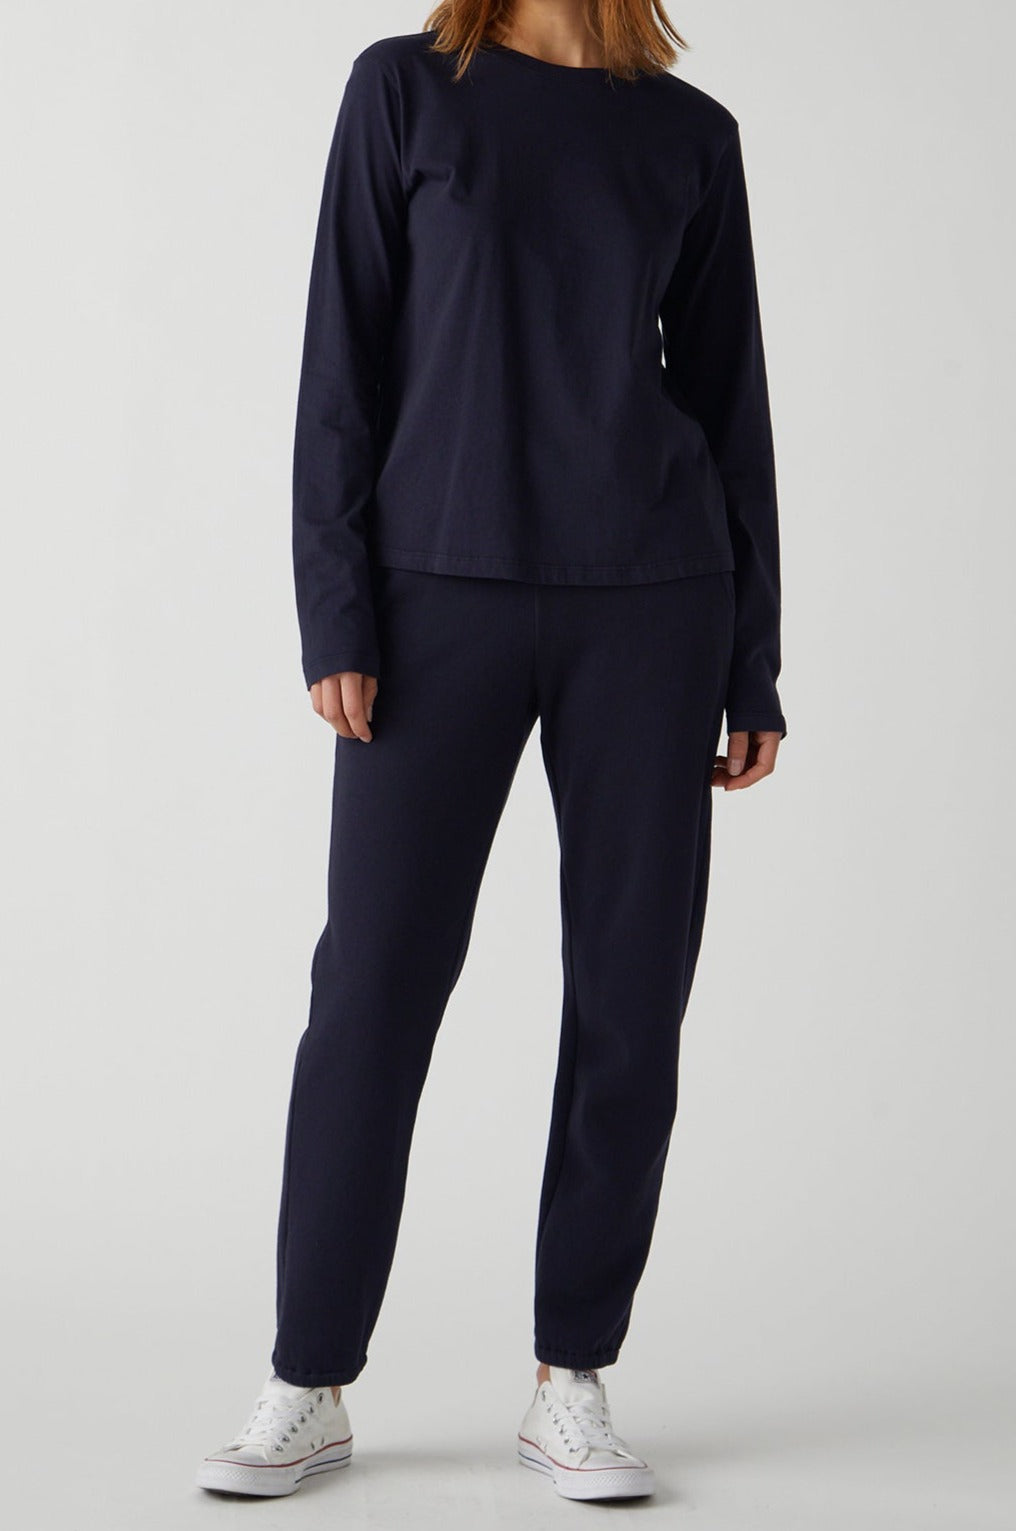 Zuma Sweatpant in navy with Vicente Tee full length front-25484328042689